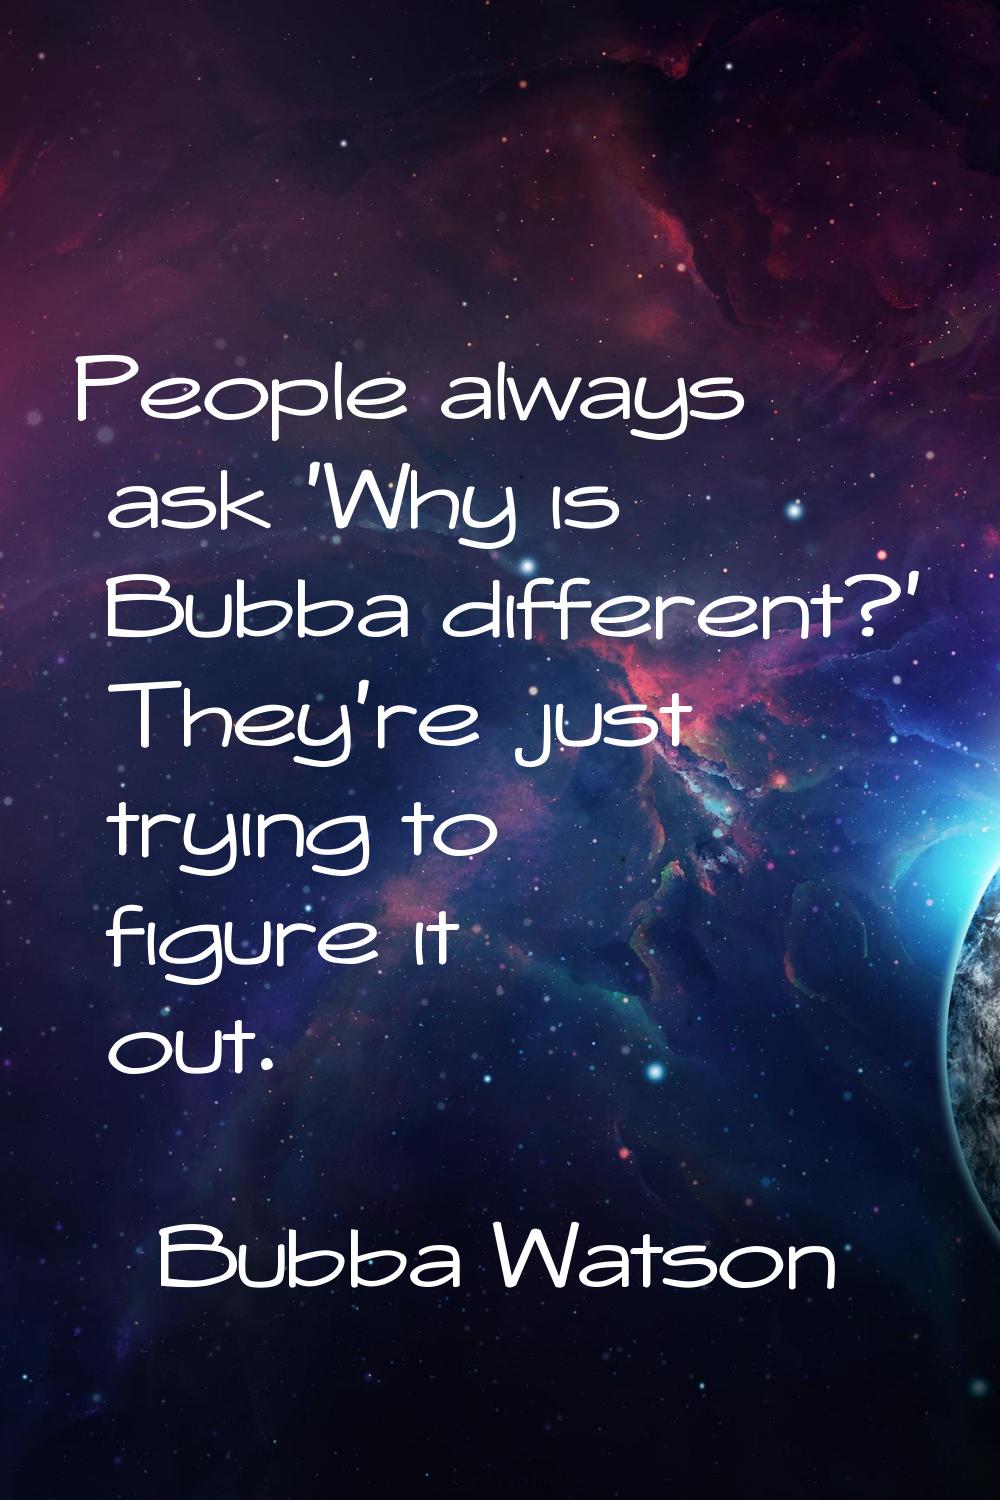 People always ask 'Why is Bubba different?' They're just trying to figure it out.